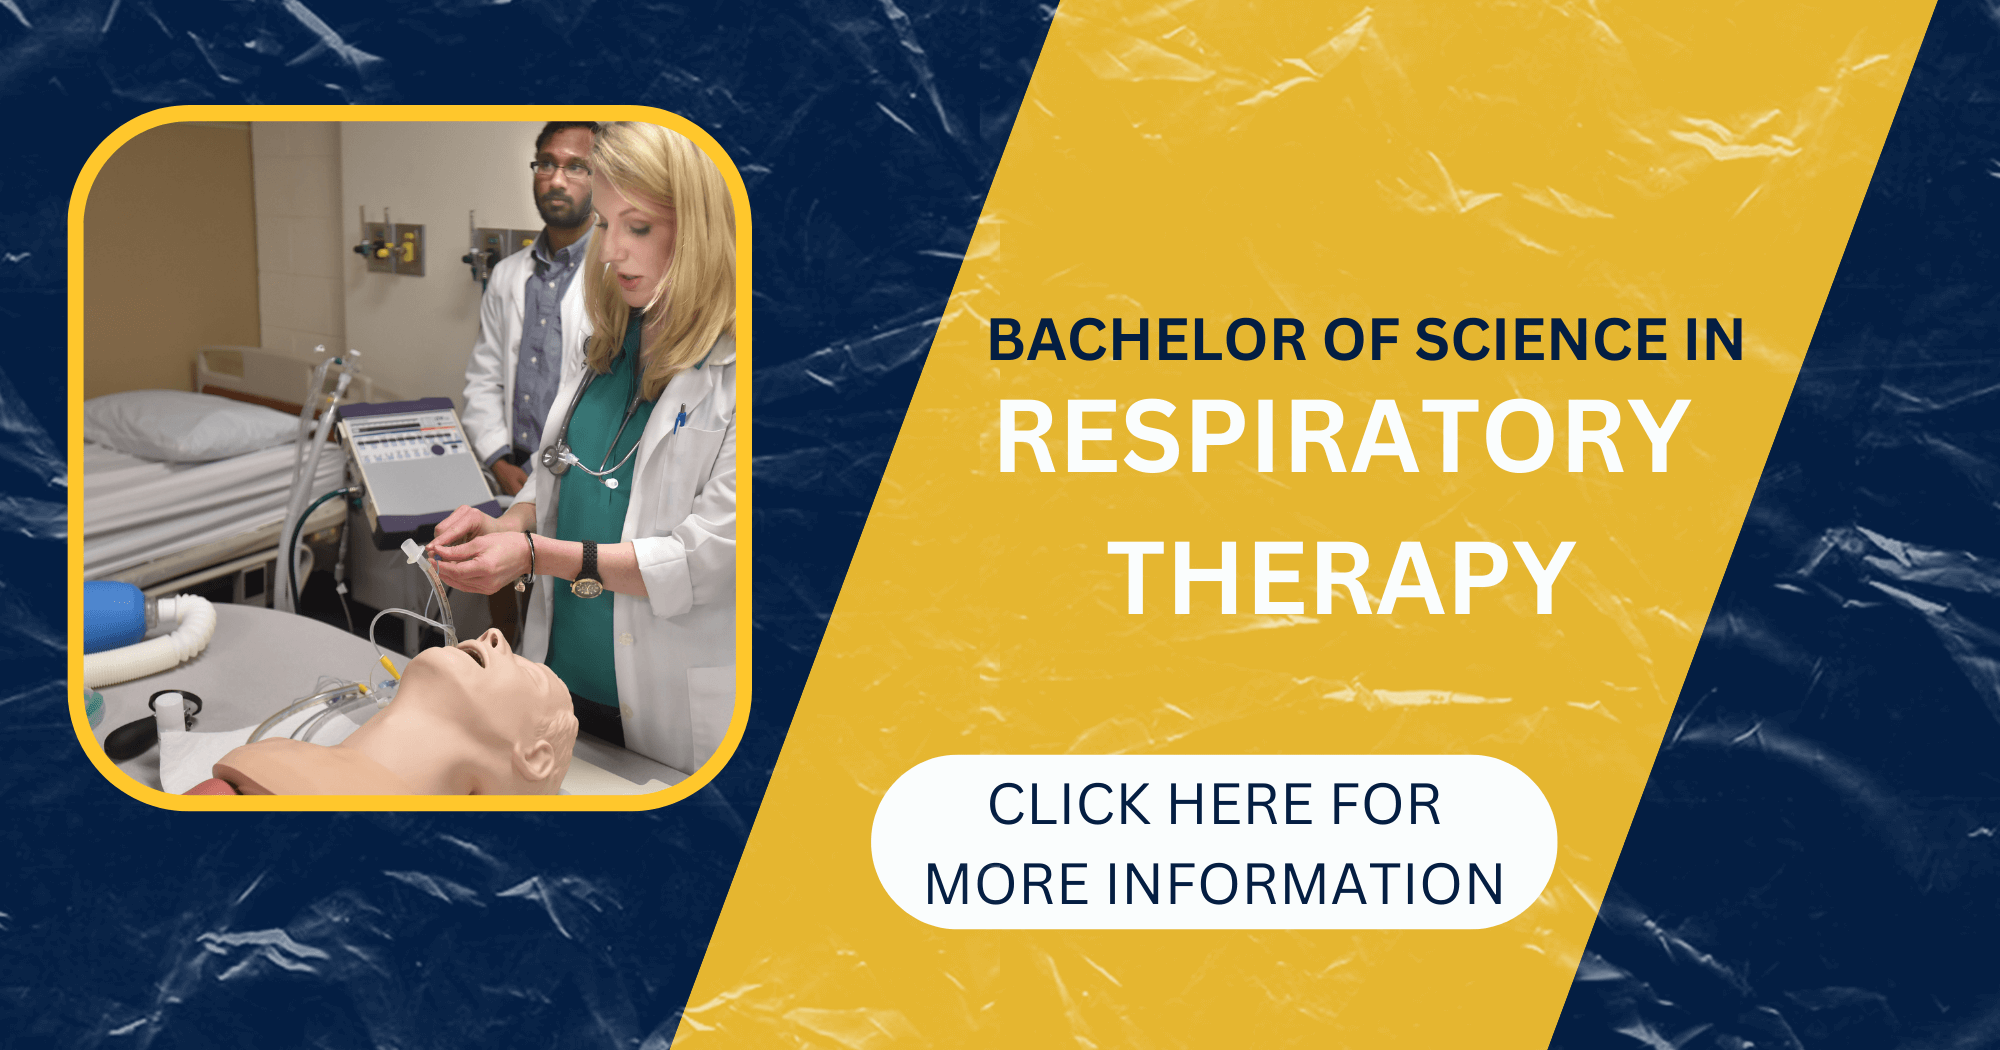 Bachelor of Science In Respiratory Therapy